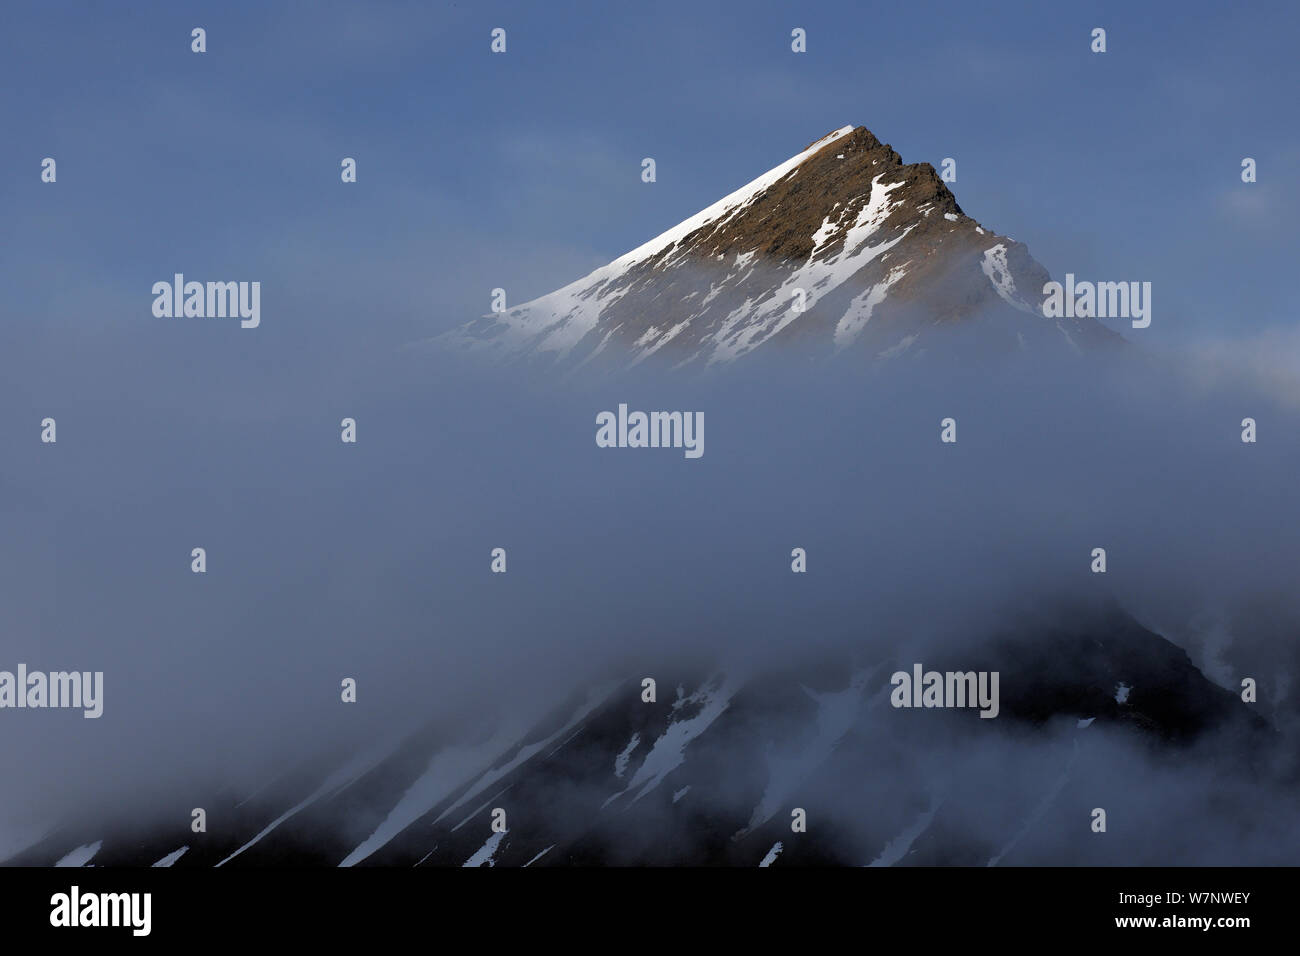 Mountain with peak above clouds, Svalbard, Norway July 2011 Stock Photo